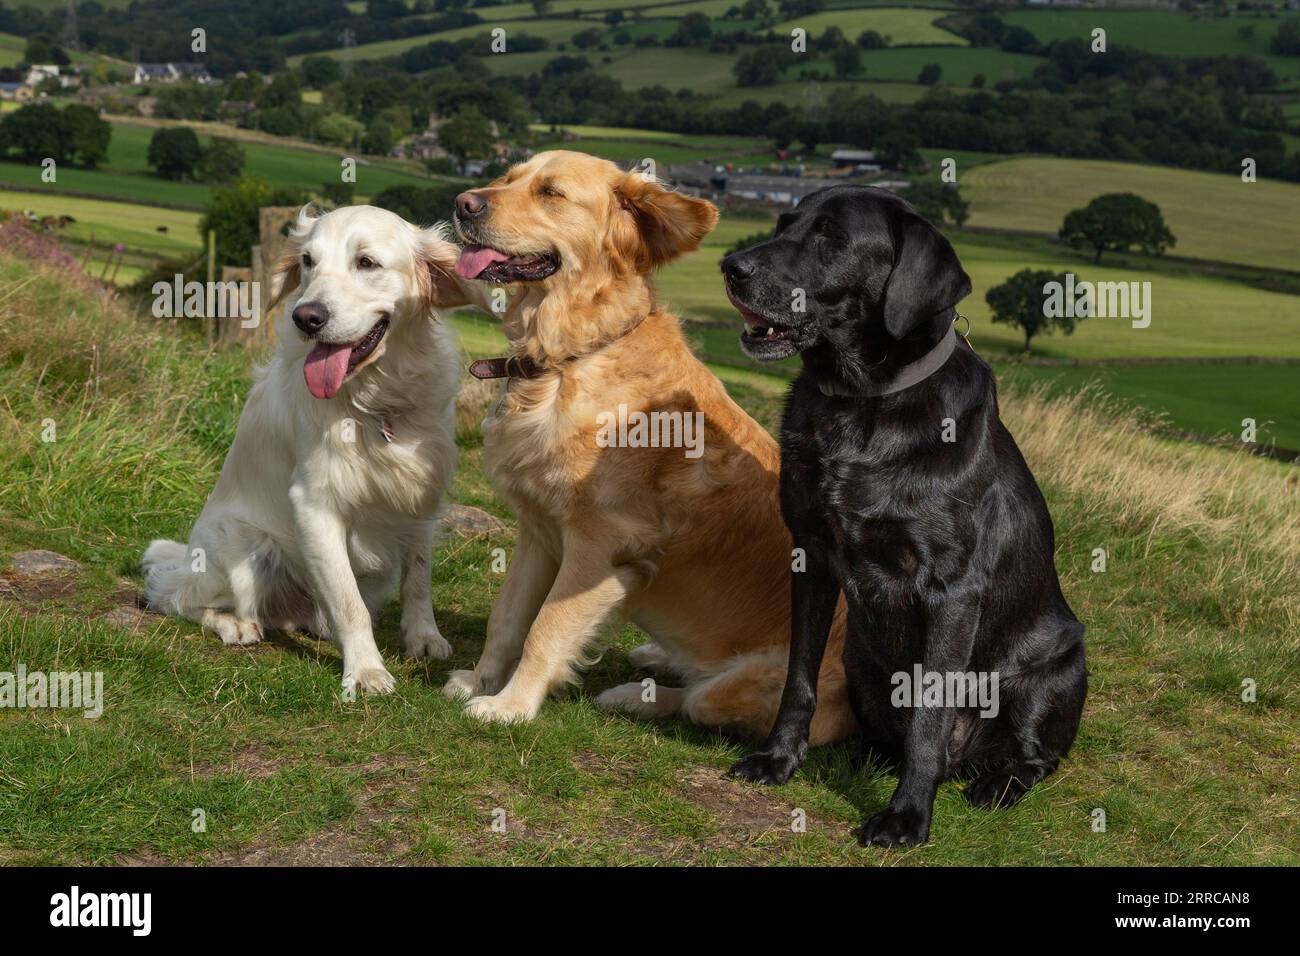 A black labrador retriever and two golden retrievers (gundogs) sitting in Yorkshire countryside. Stock Photo